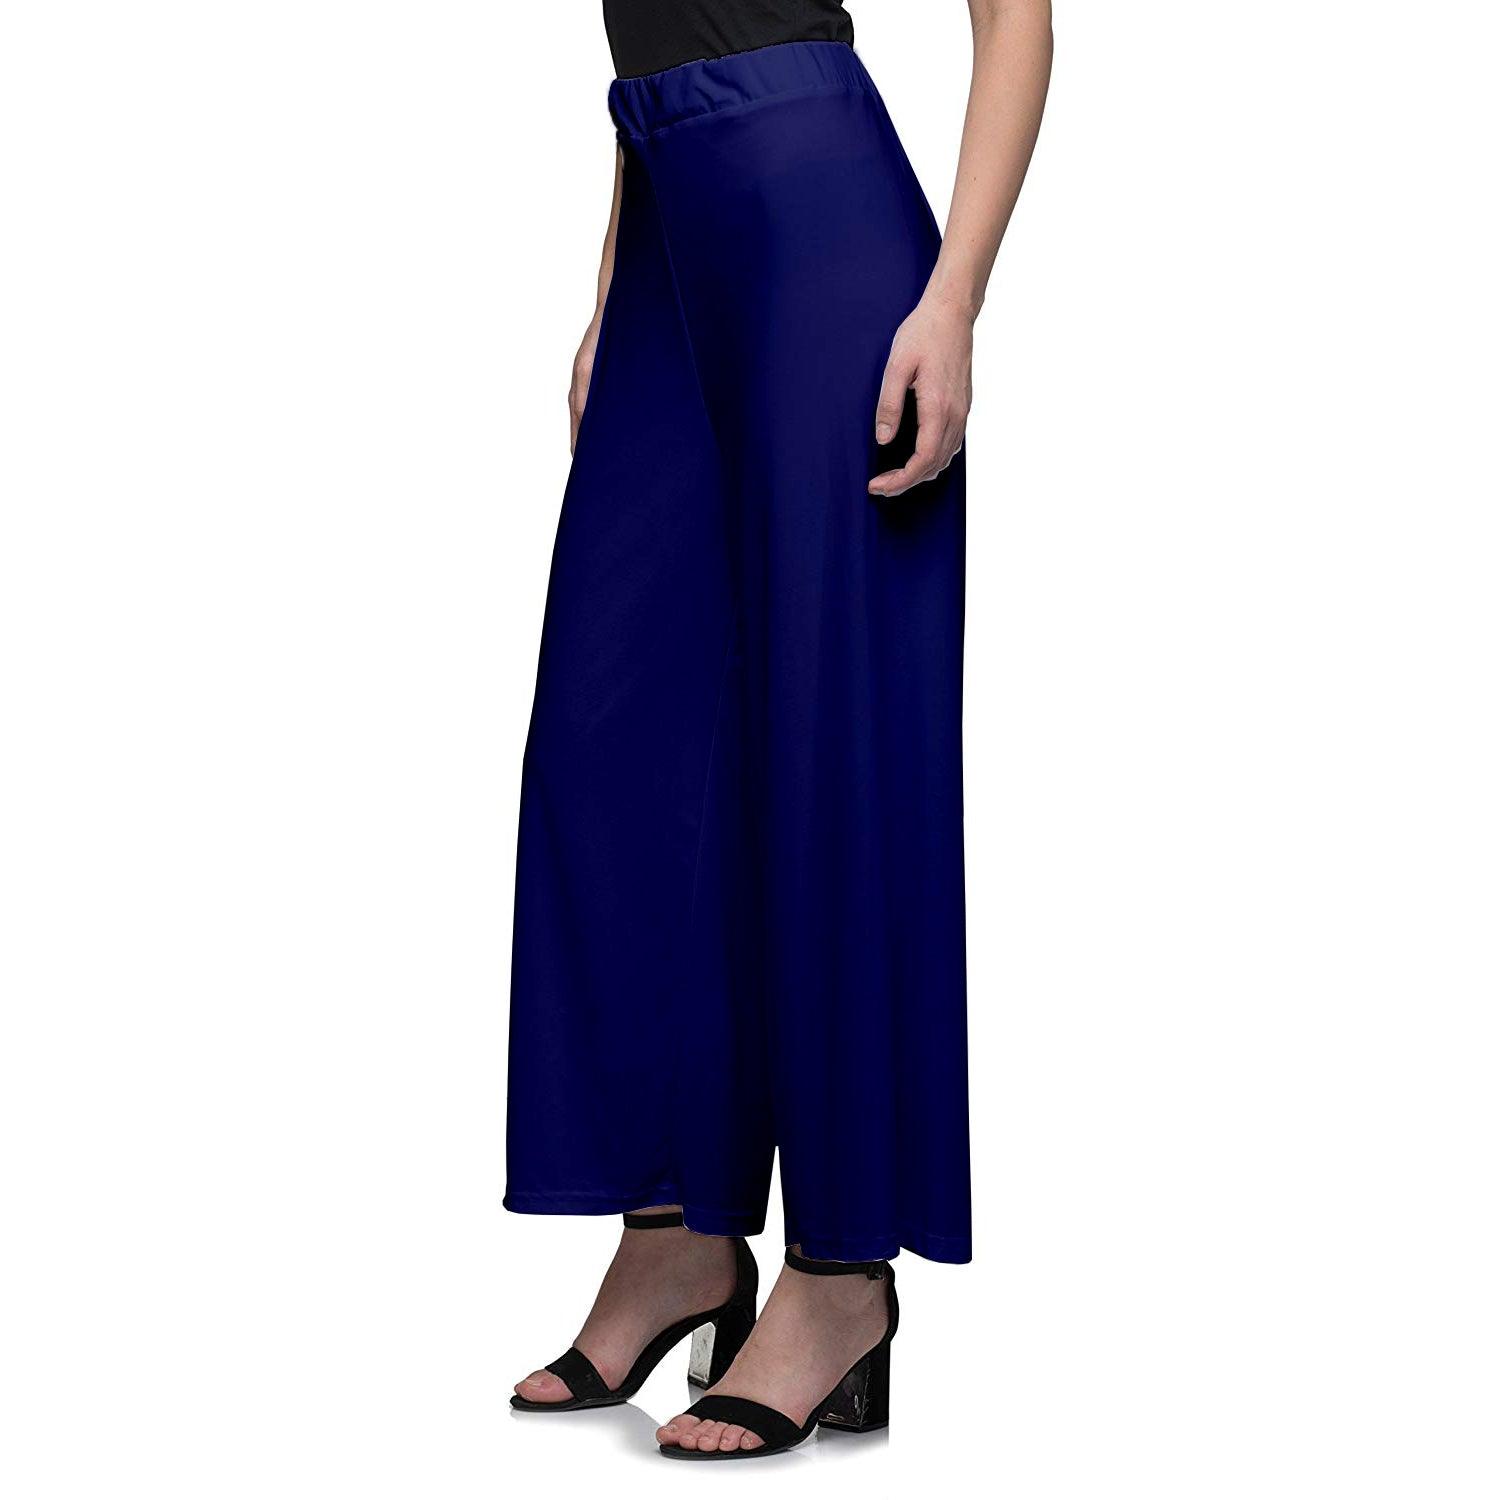 Women's Fashion Crop Top Solid Color Wide-leg Pants Two-piece Set Short  Sleeves | eBay